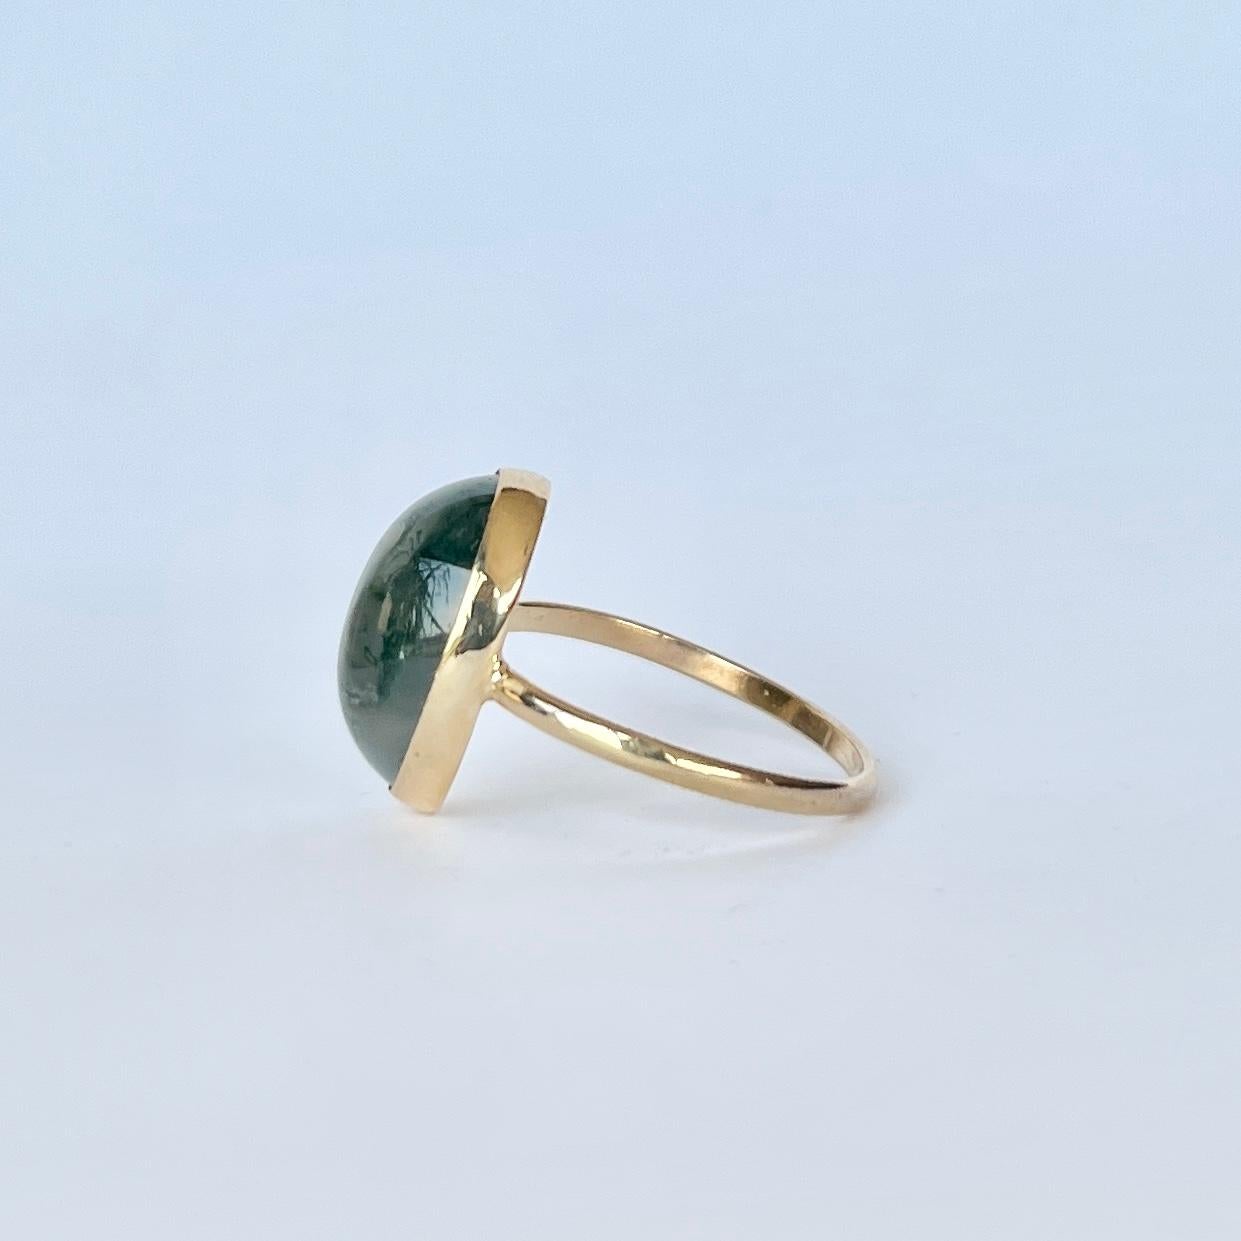 Cabochon Antique Moss Agate and 9 Carat Gold Ring